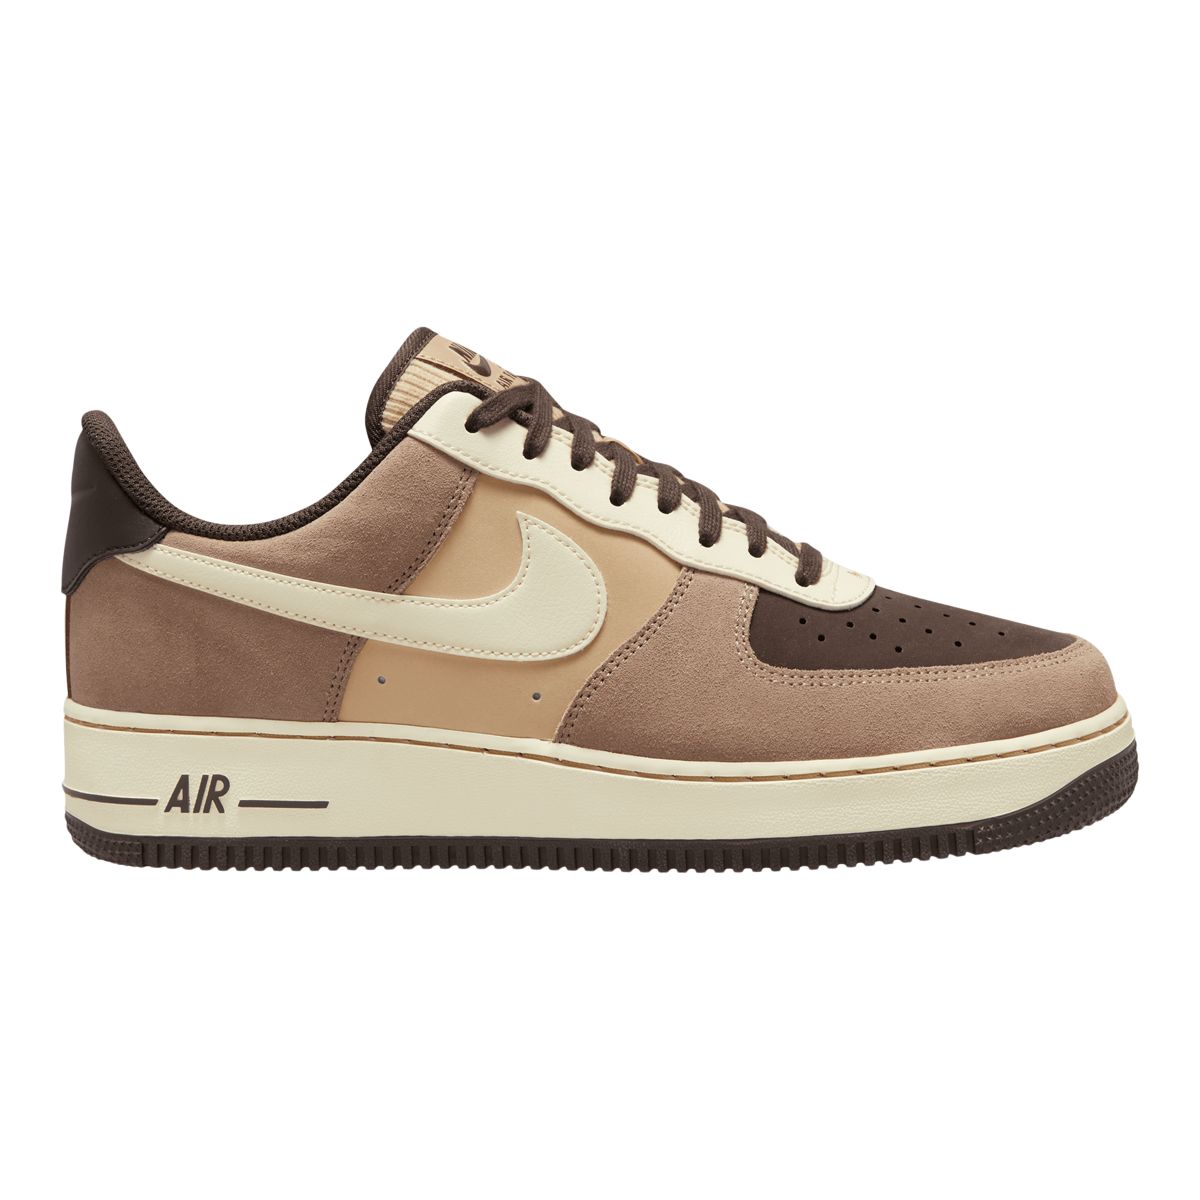 Nike Men's Air Force 1 '07 LV8 NAS Shoes